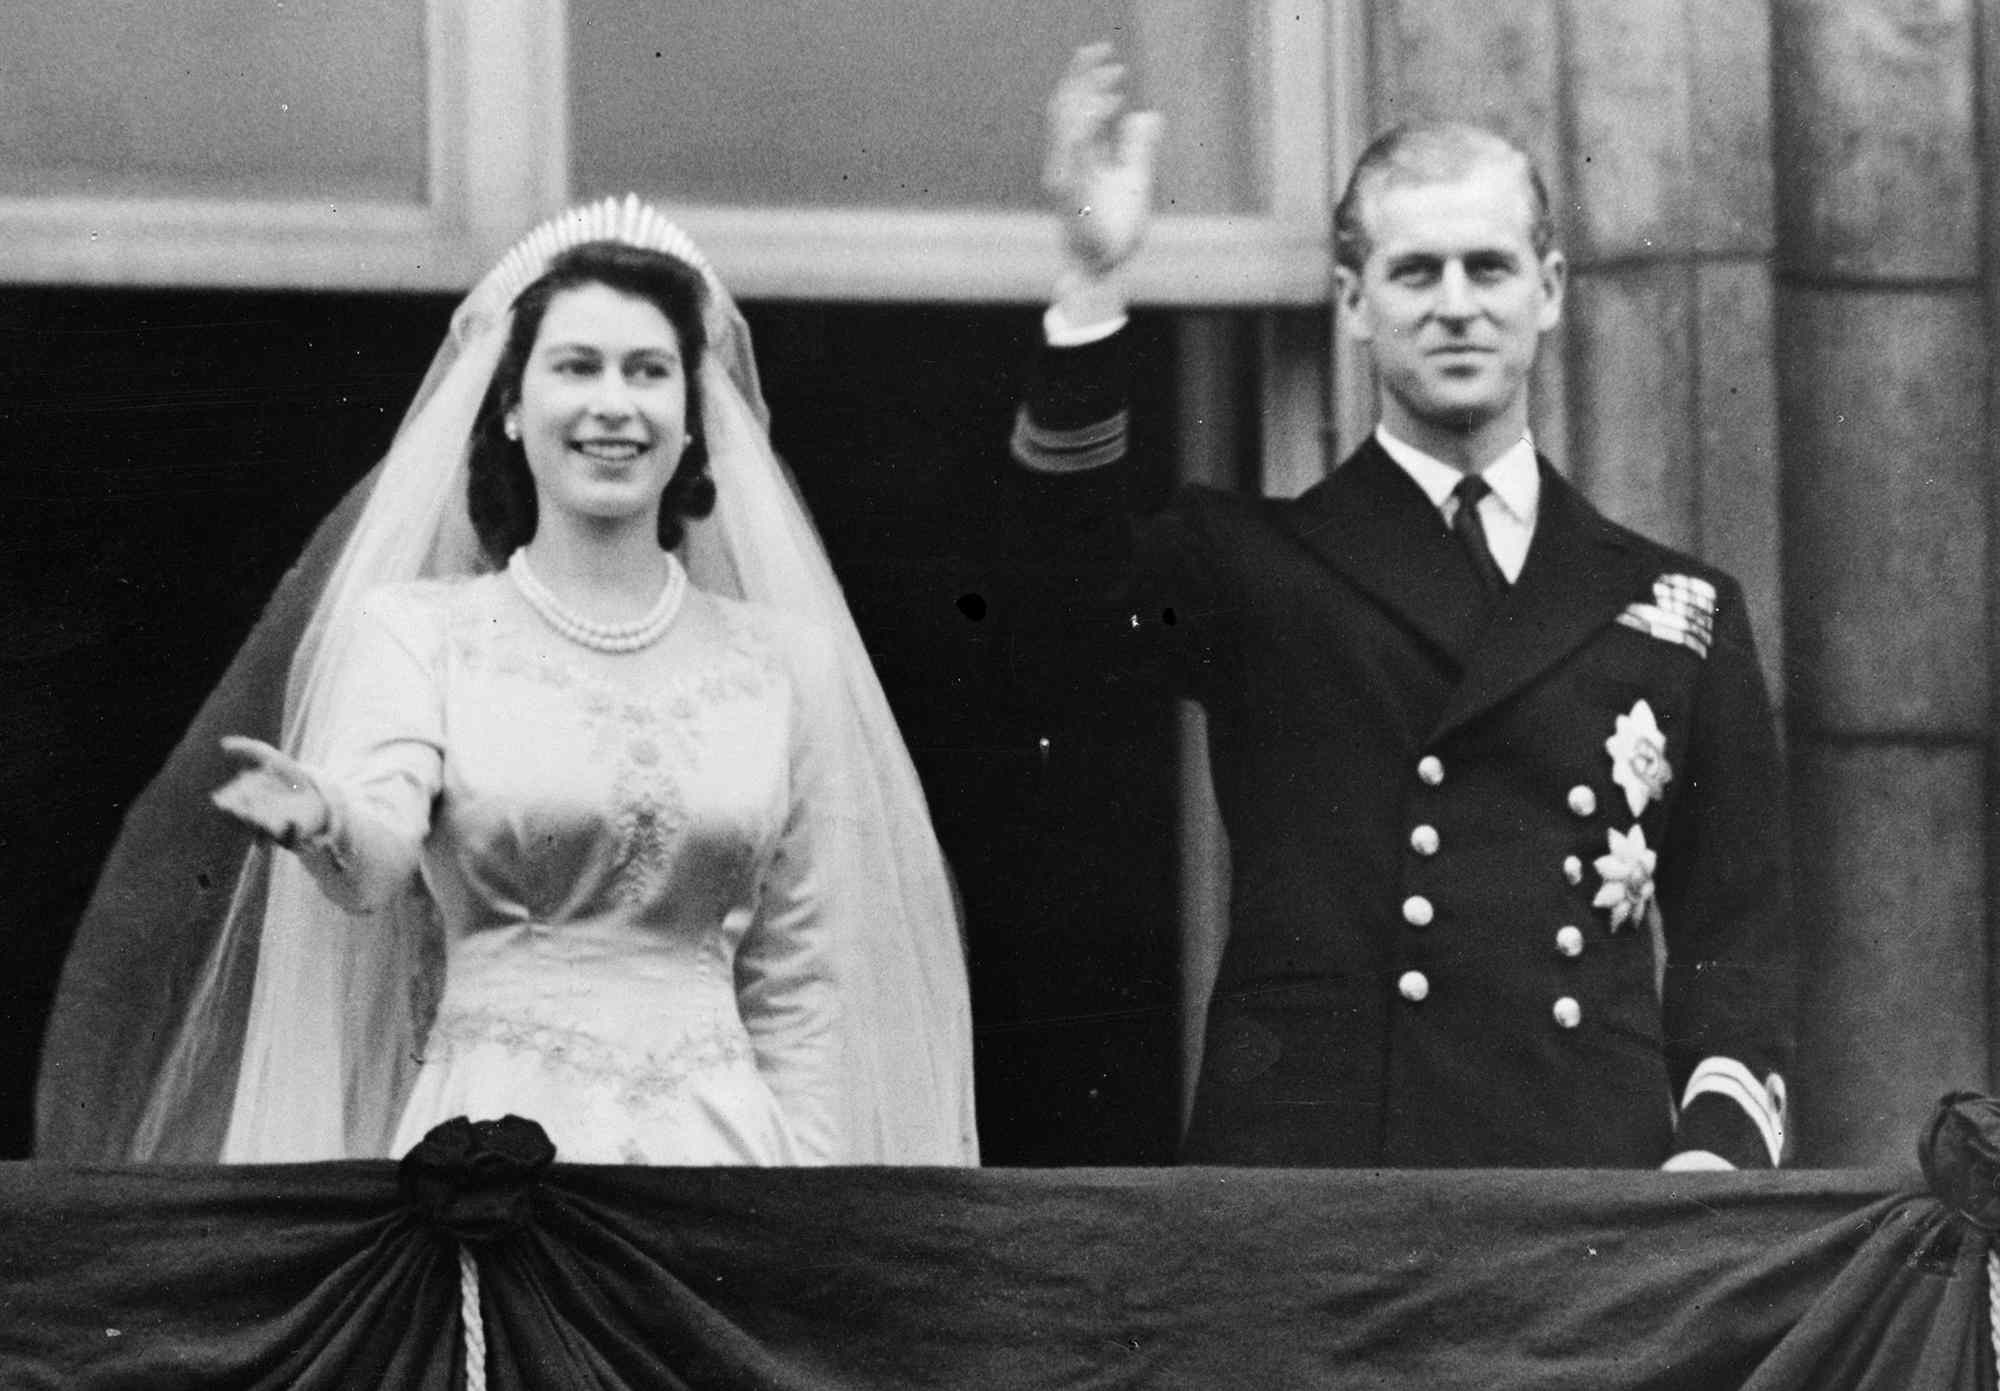 Princess Elizabeth and The Prince Philip, Duke of Edinburgh waving to a crowd from the balcony of Buckingham Palace, London shortly after their wedding at Westminster Abbey